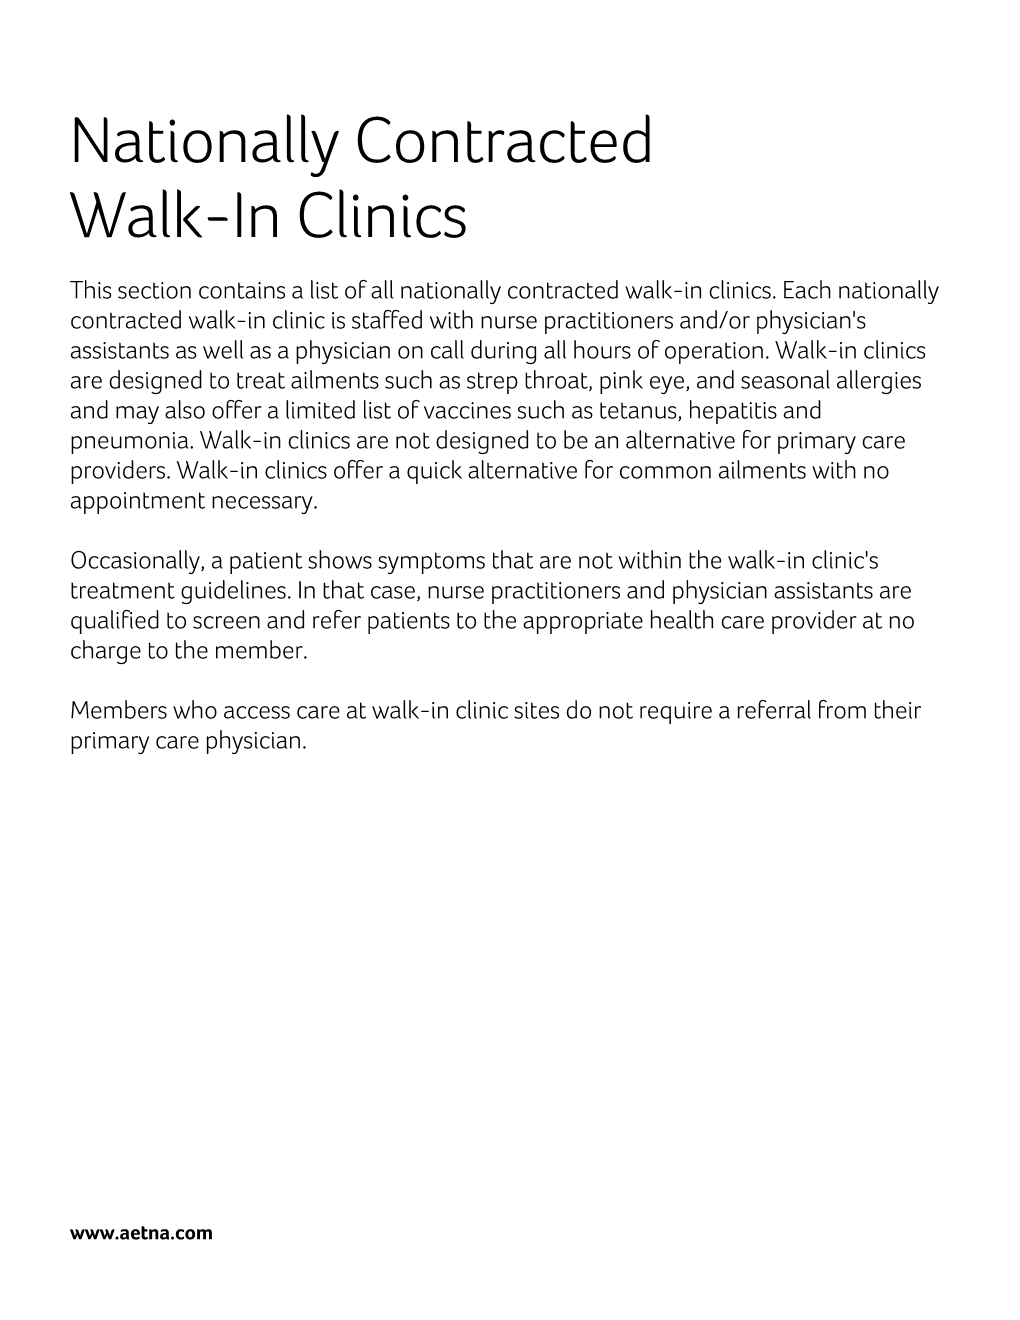 Nationally Contracted Walk-In Clinics